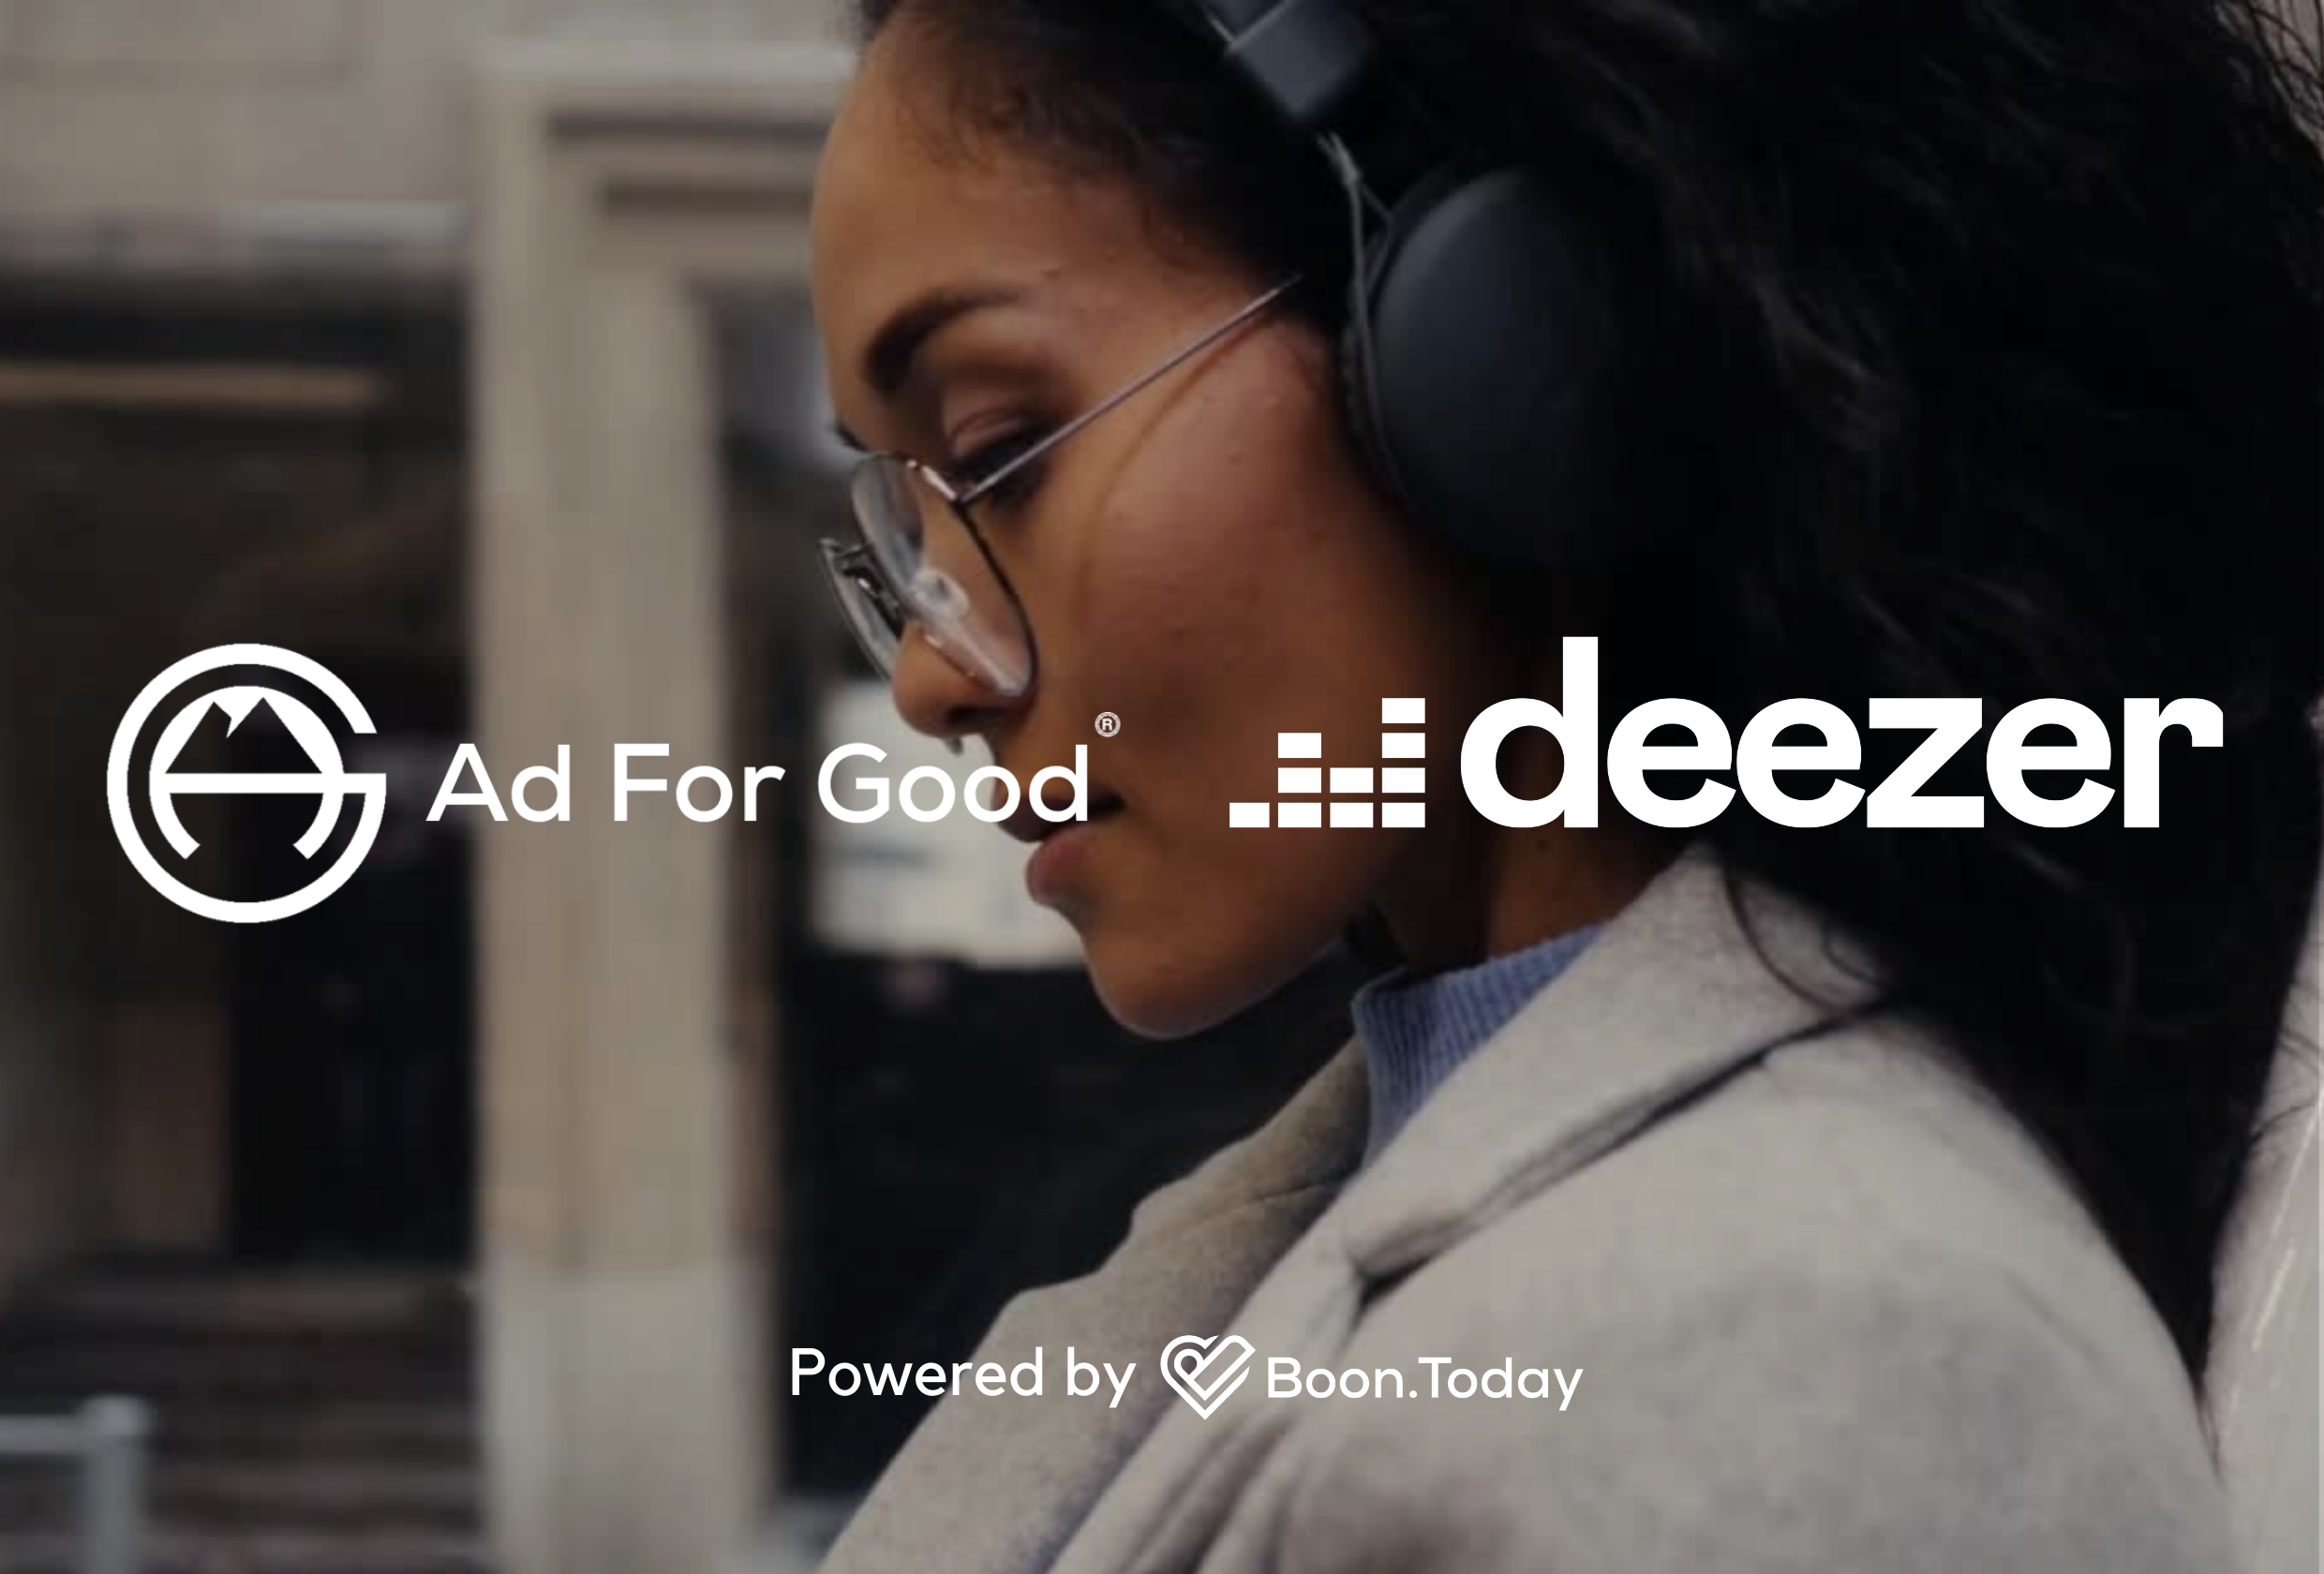 Deezer becomes the first audio streaming service to join the socially conscious Ad For Good Label